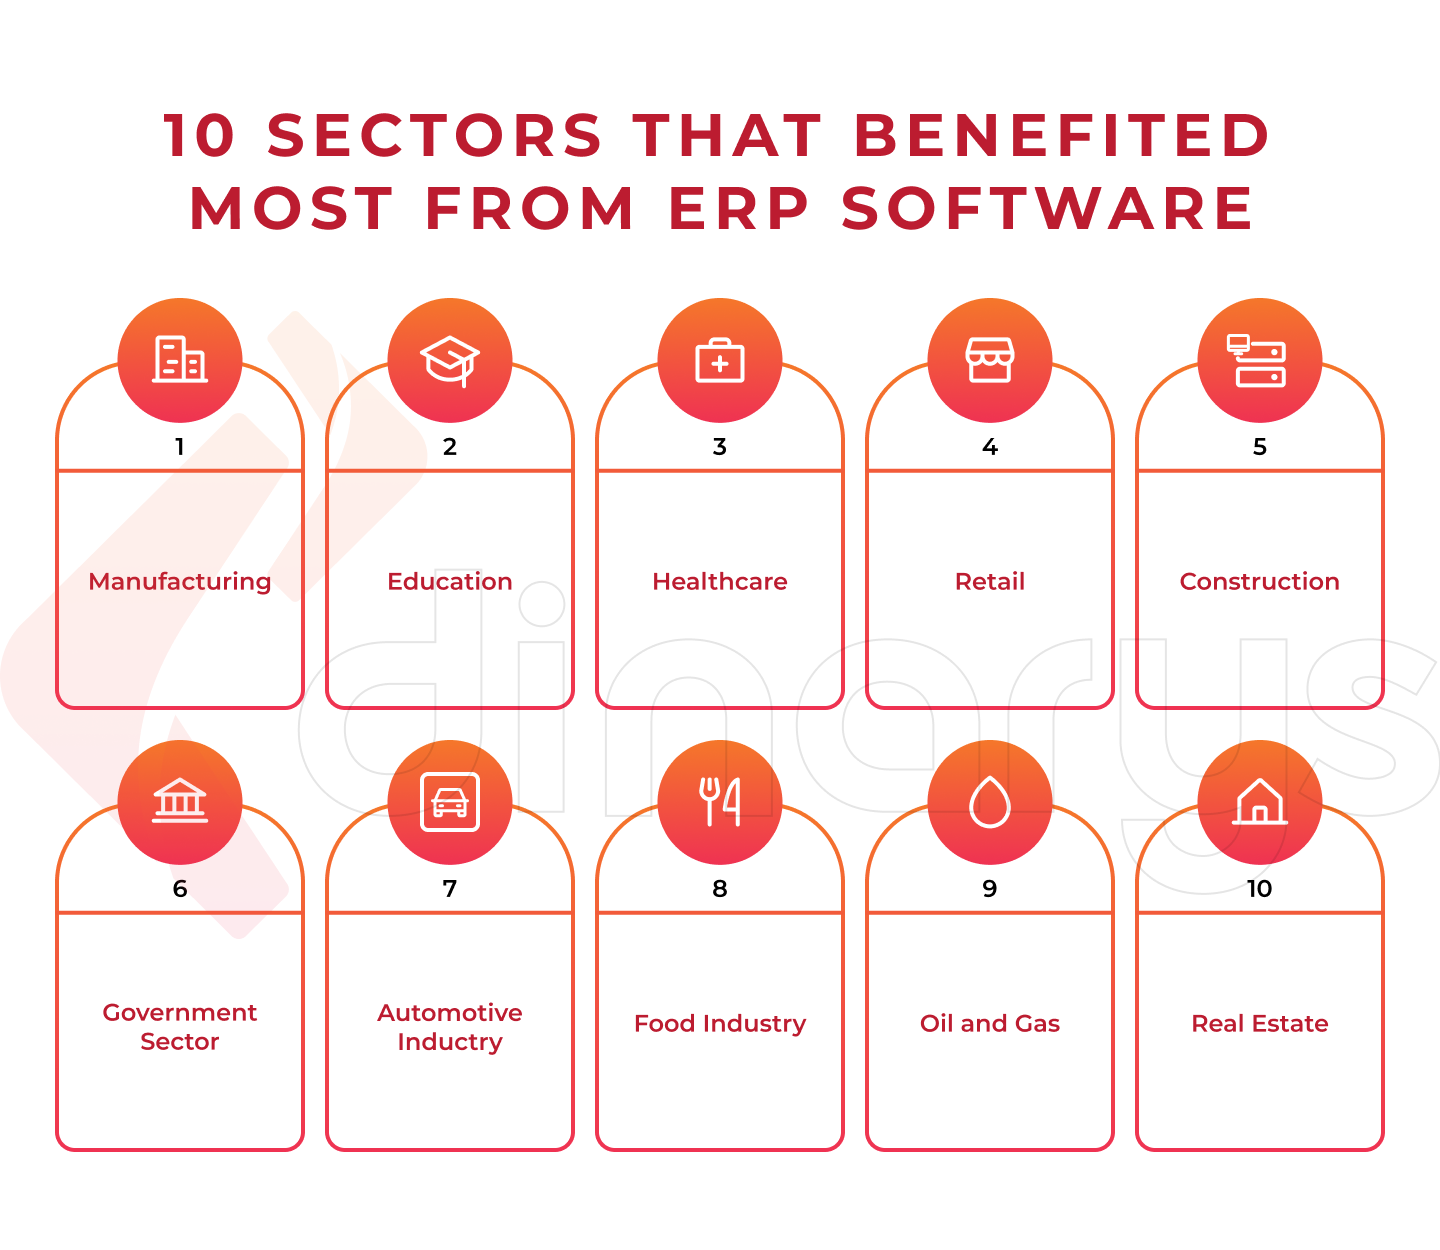 10 Sectors That Benefited Most from ERP Software